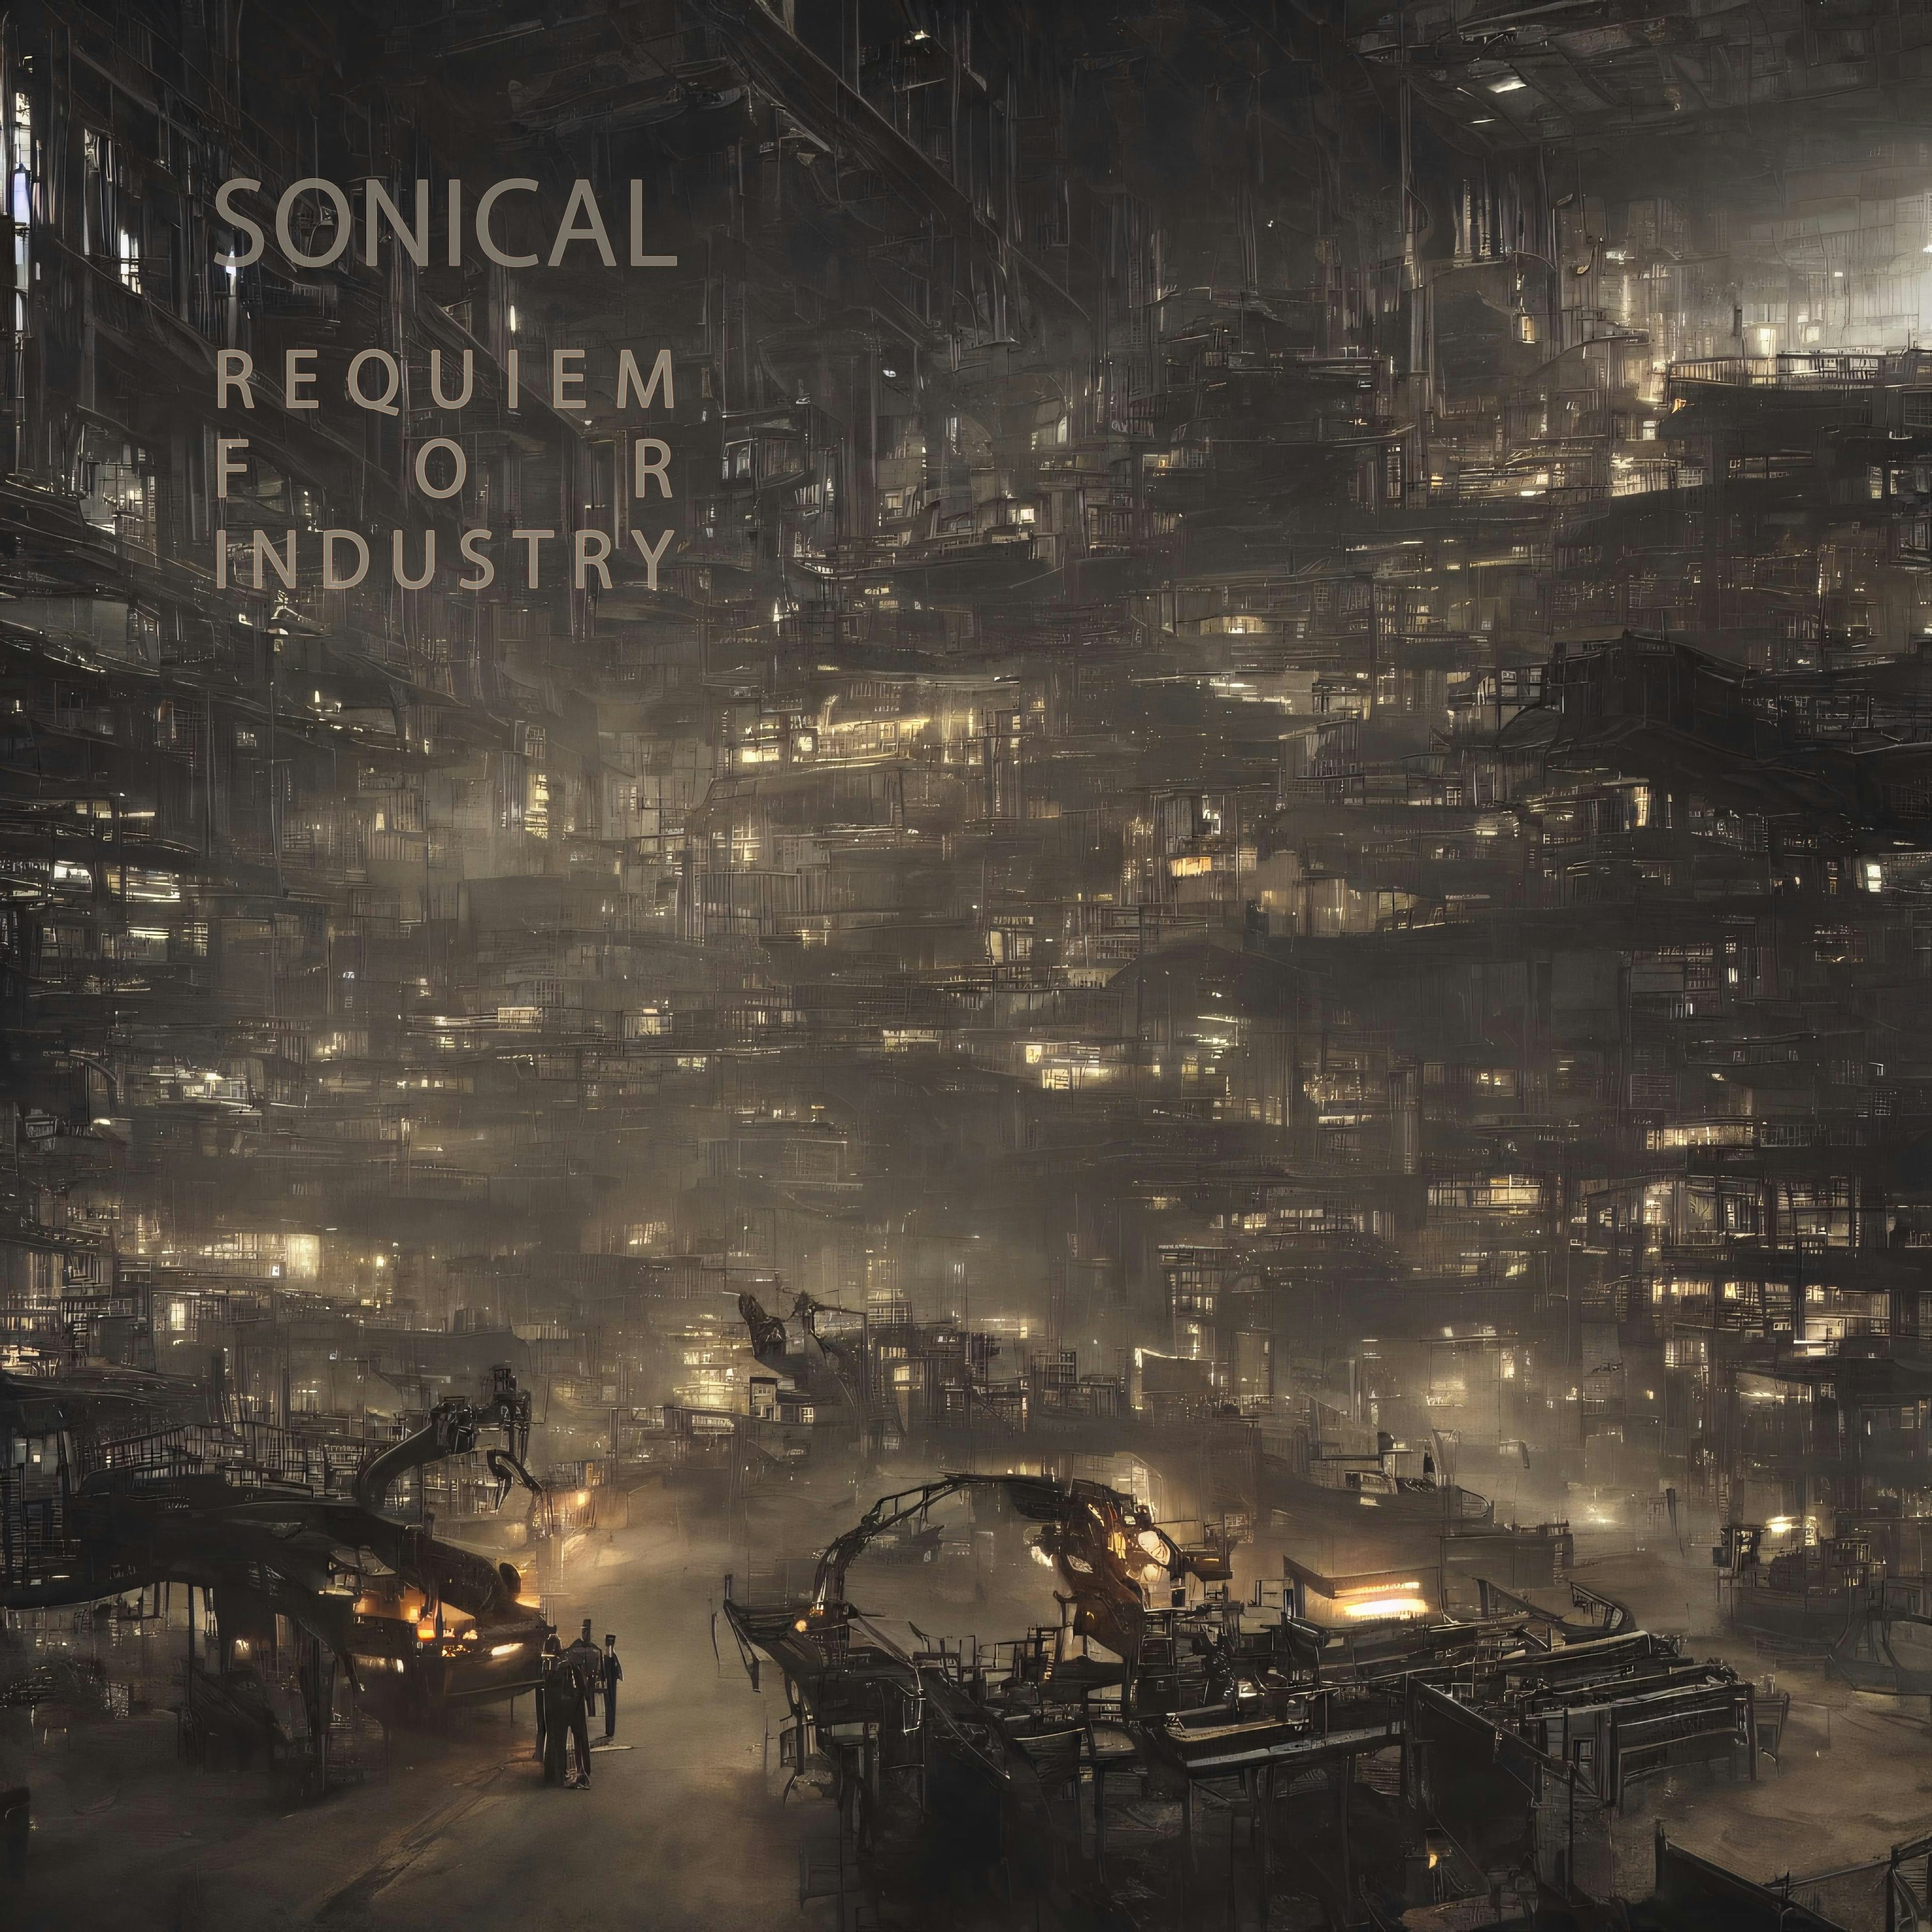 Cover art for Requiem For Industry by Sonical